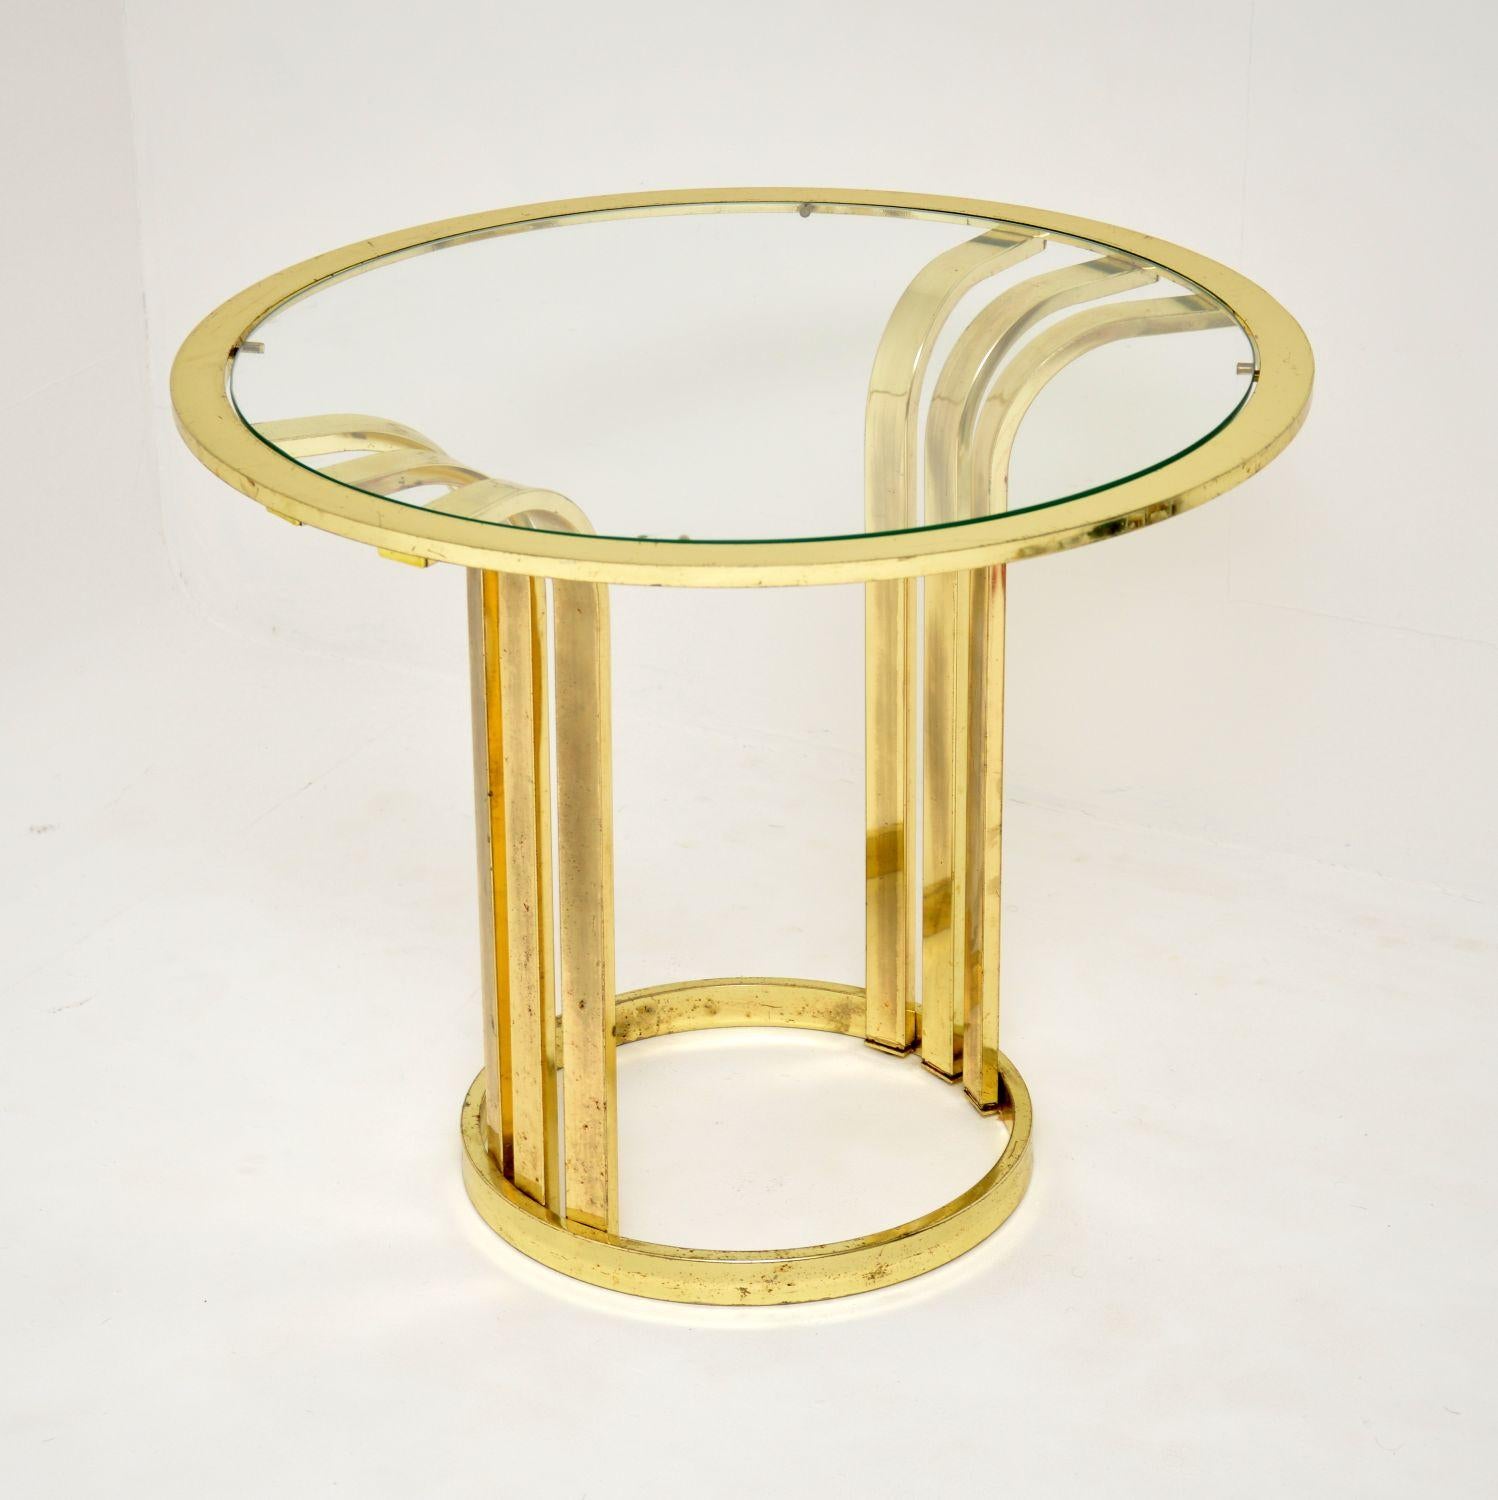 A beautiful Hollywood regency style side table in brass. This was made in England, it dates from the 1970’s.

It is extremely stylish and is a great size, perfect for use as a coffee table or an occasional side table.

The condition is good for